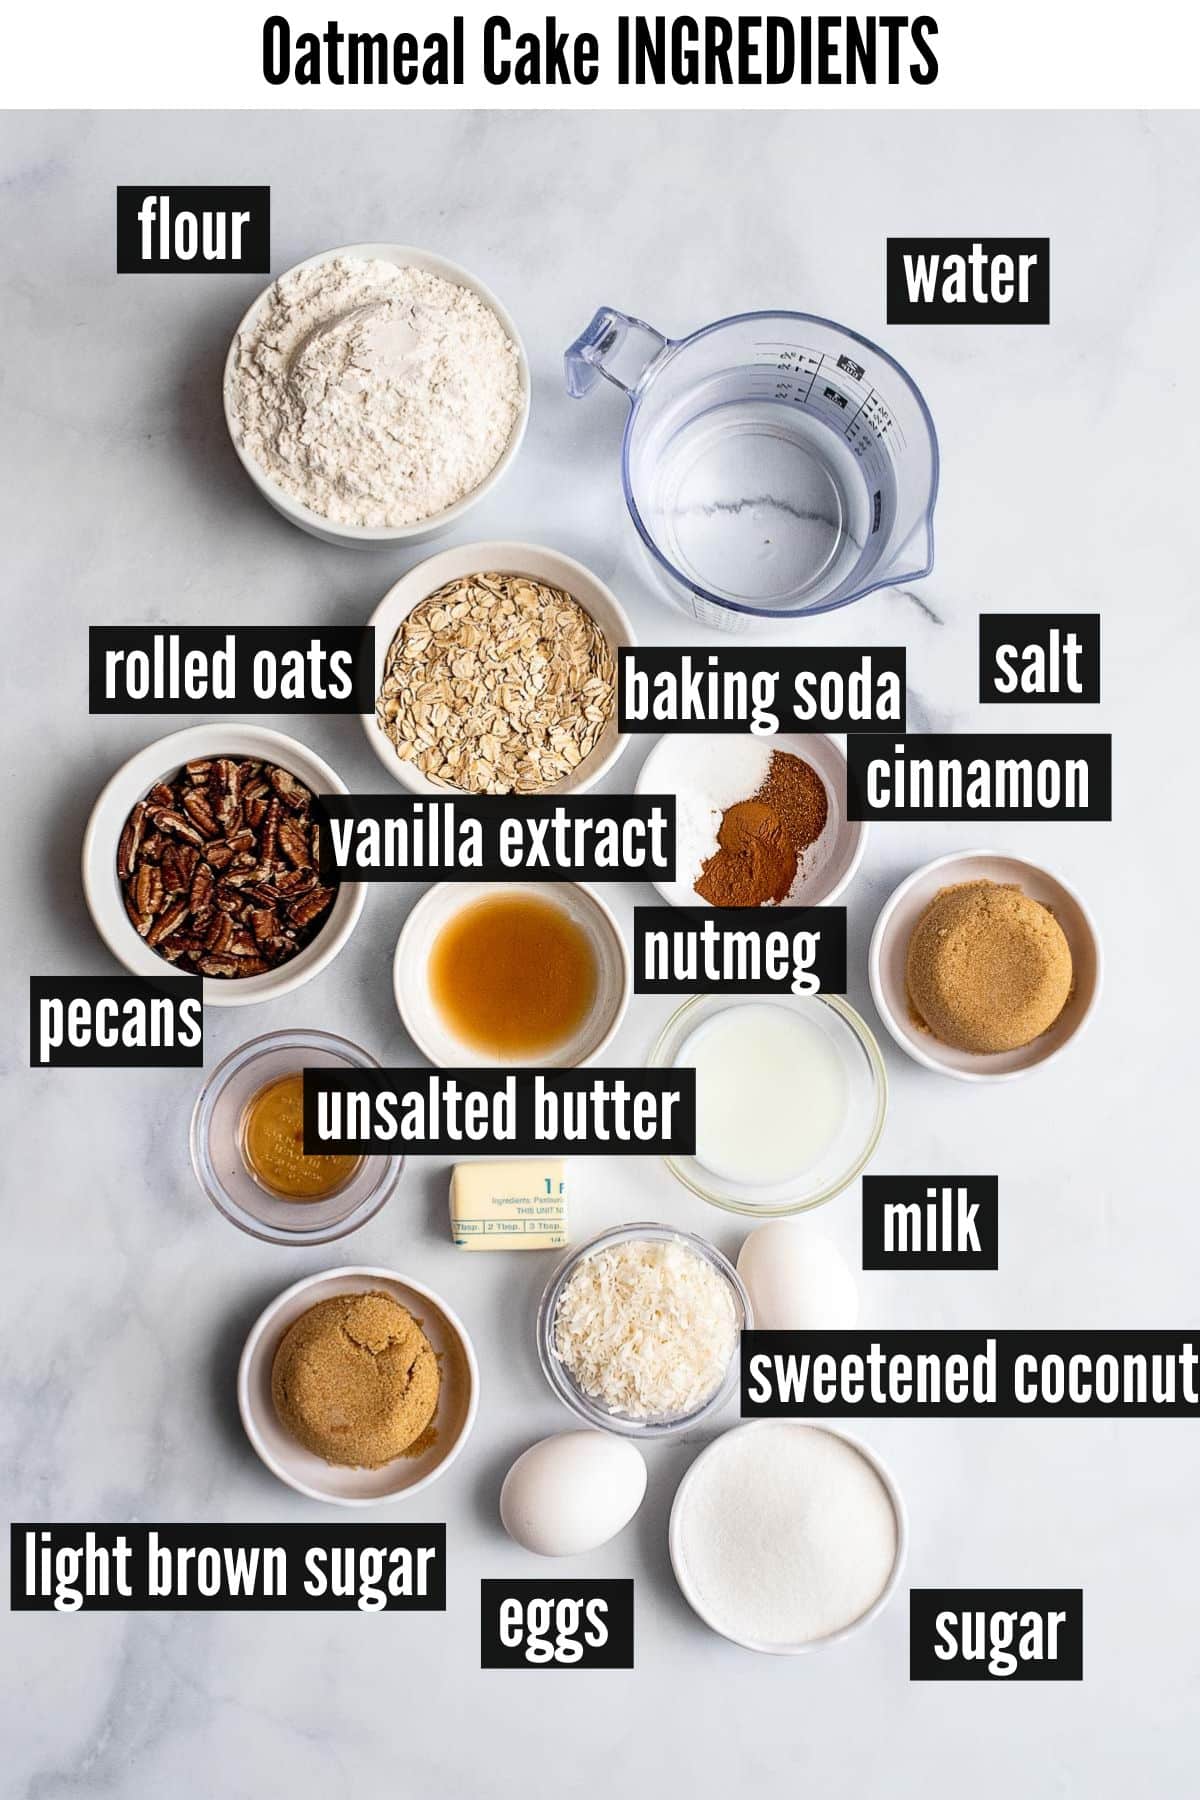 oatmeal cake labelled ingredients.